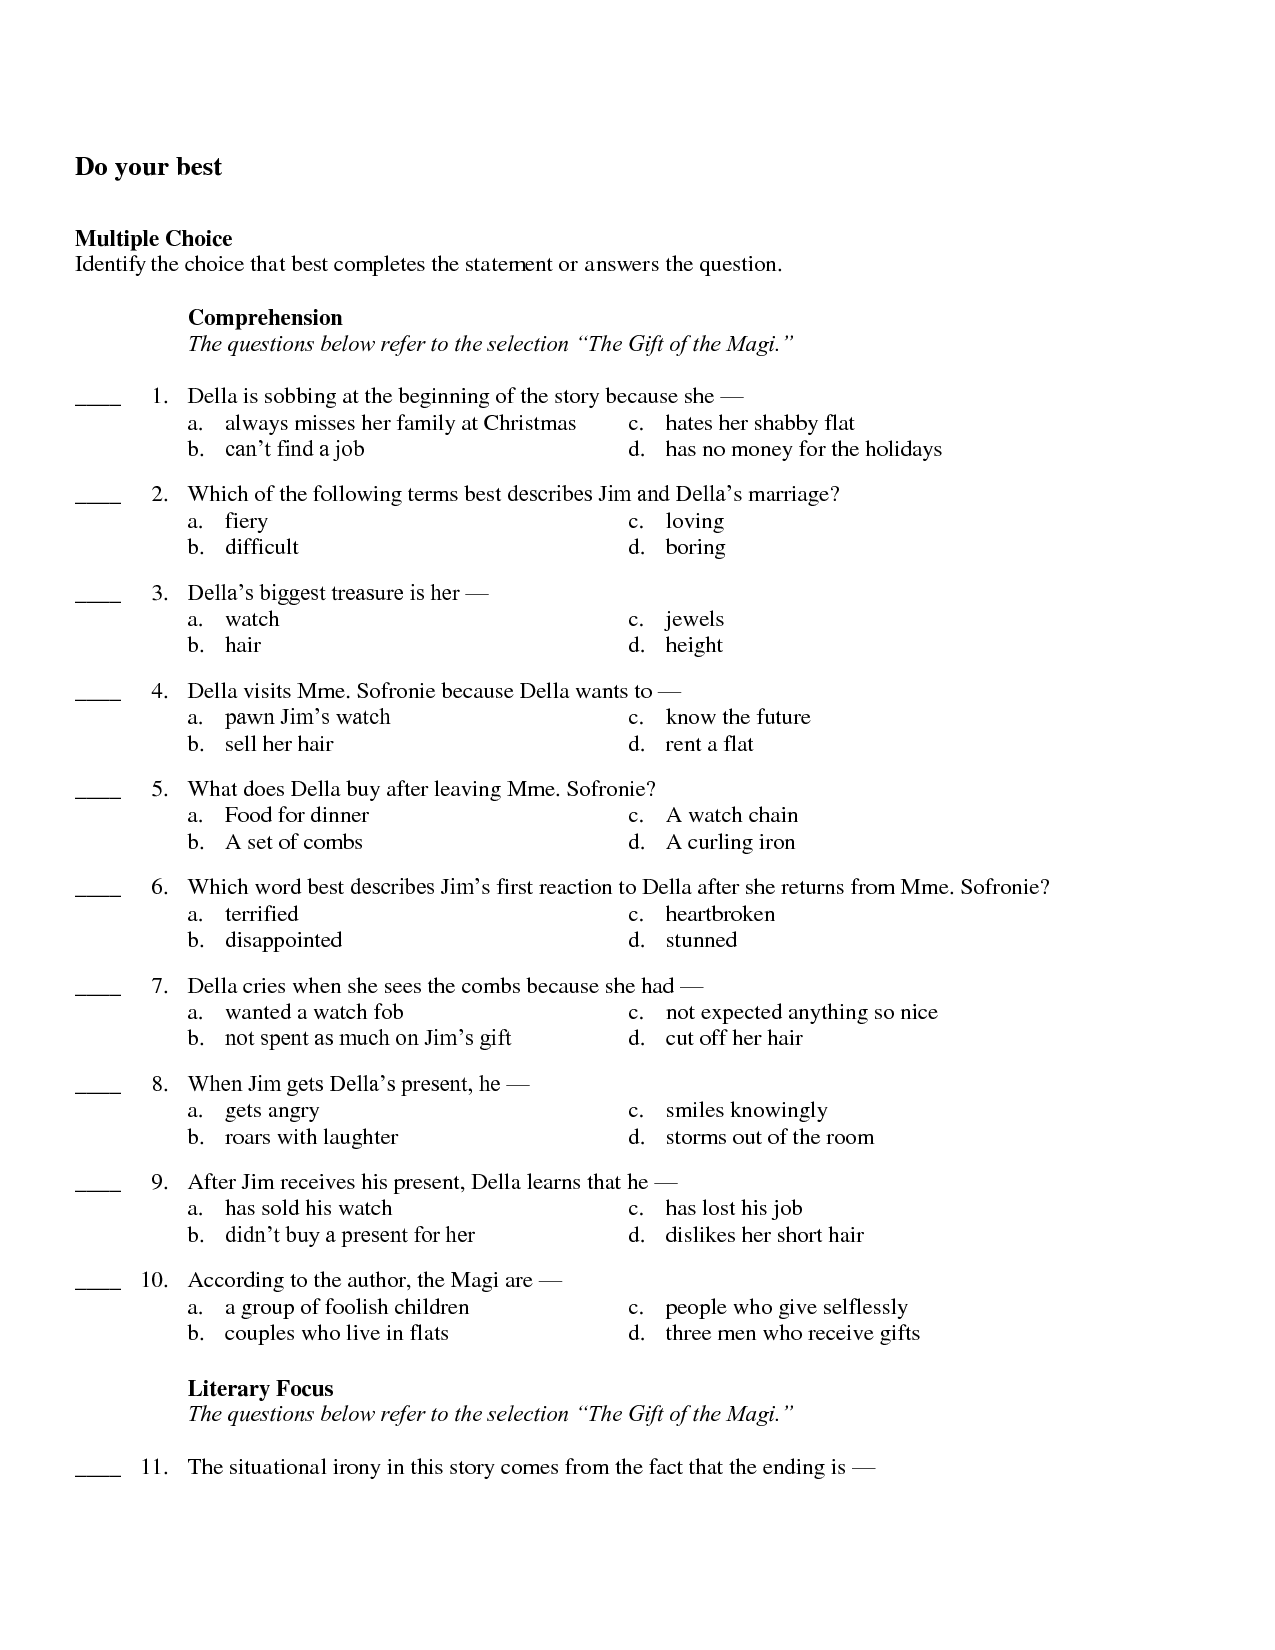 holt-science-reading-skills-worksheet-ch-3-answers-luker-thervin